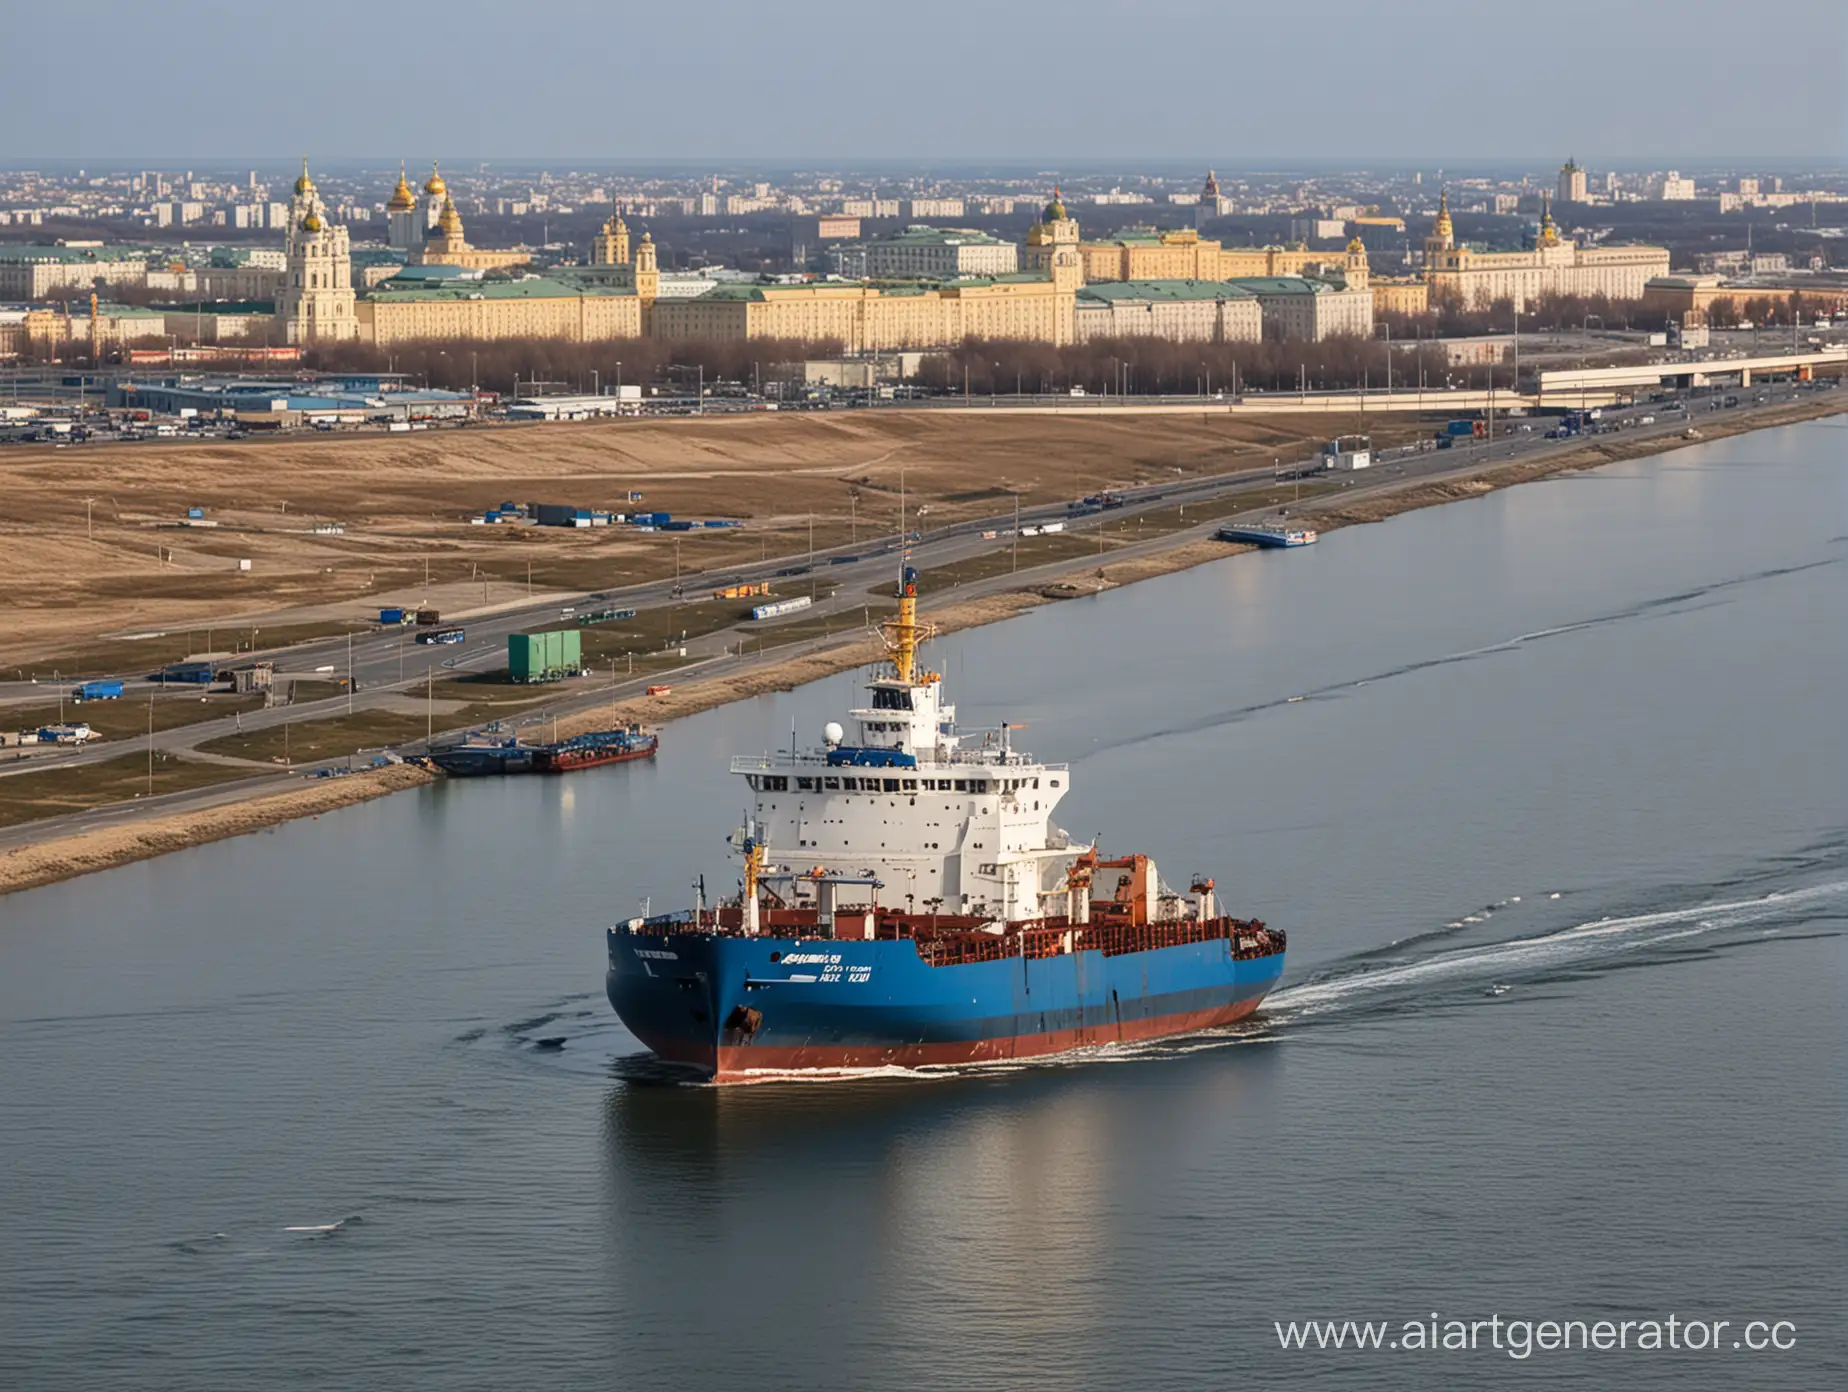 Navigating-the-RostovonDon-to-Astrakhan-Voyage-Project-R168-Vessel-and-Oversized-Cargo